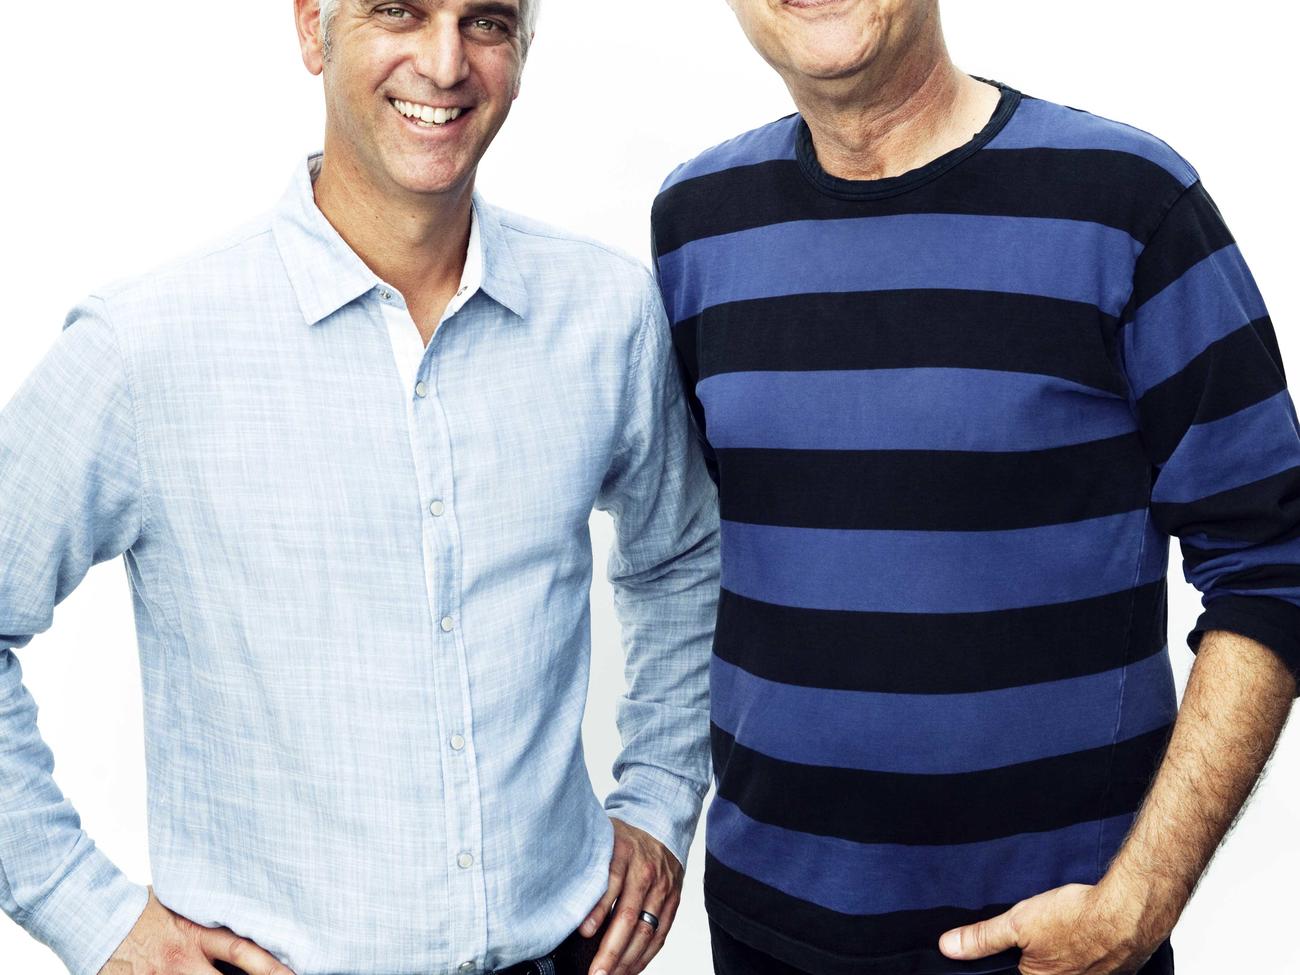 Mark Bittman’s new food startup dangles a carrot in front of America